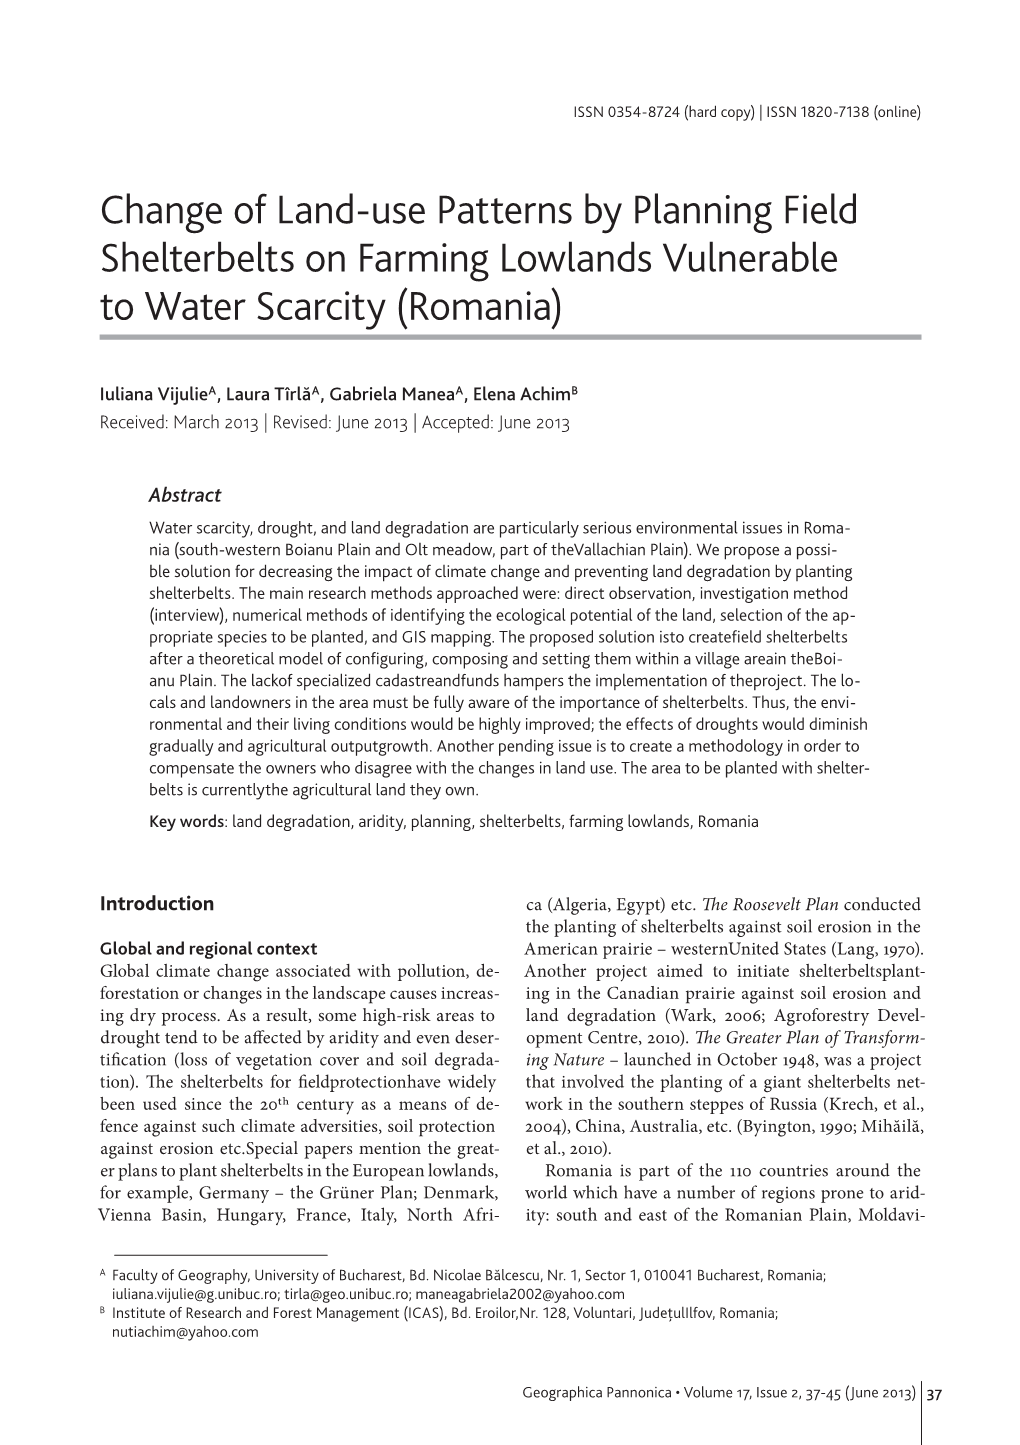 Change of Land-Use Patterns by Planning Field Shelterbelts on Farming Lowlands Vulnerable to Water Scarcity (Romania)